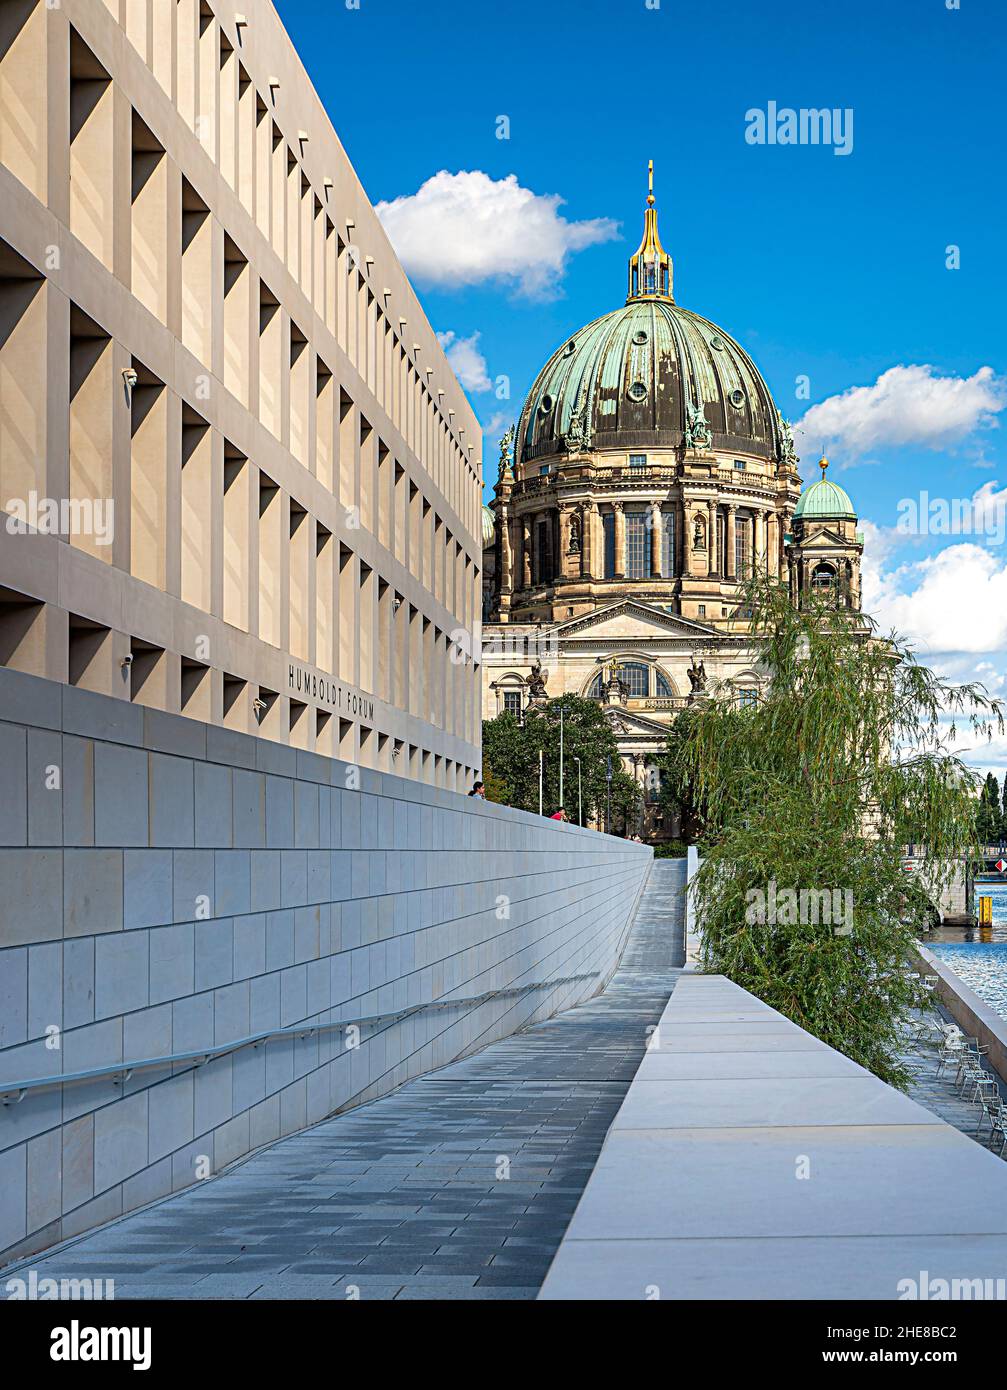 The Banks Of The Spree At The Humboldt Forum In Berlin Stock Photo